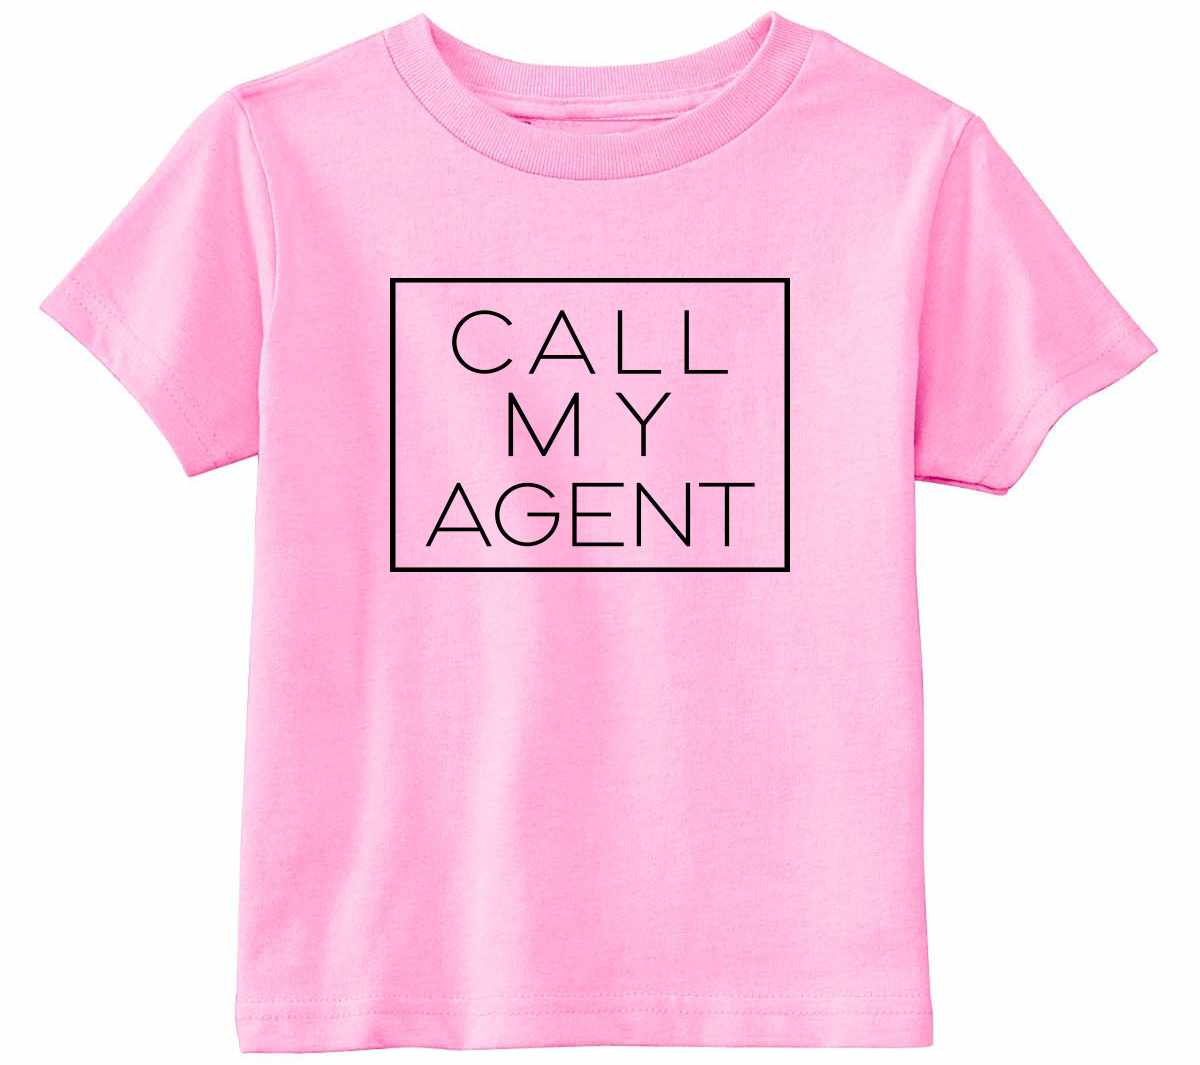 Call My Agent on Infant-Toddler T-Shirt (#1390-7)